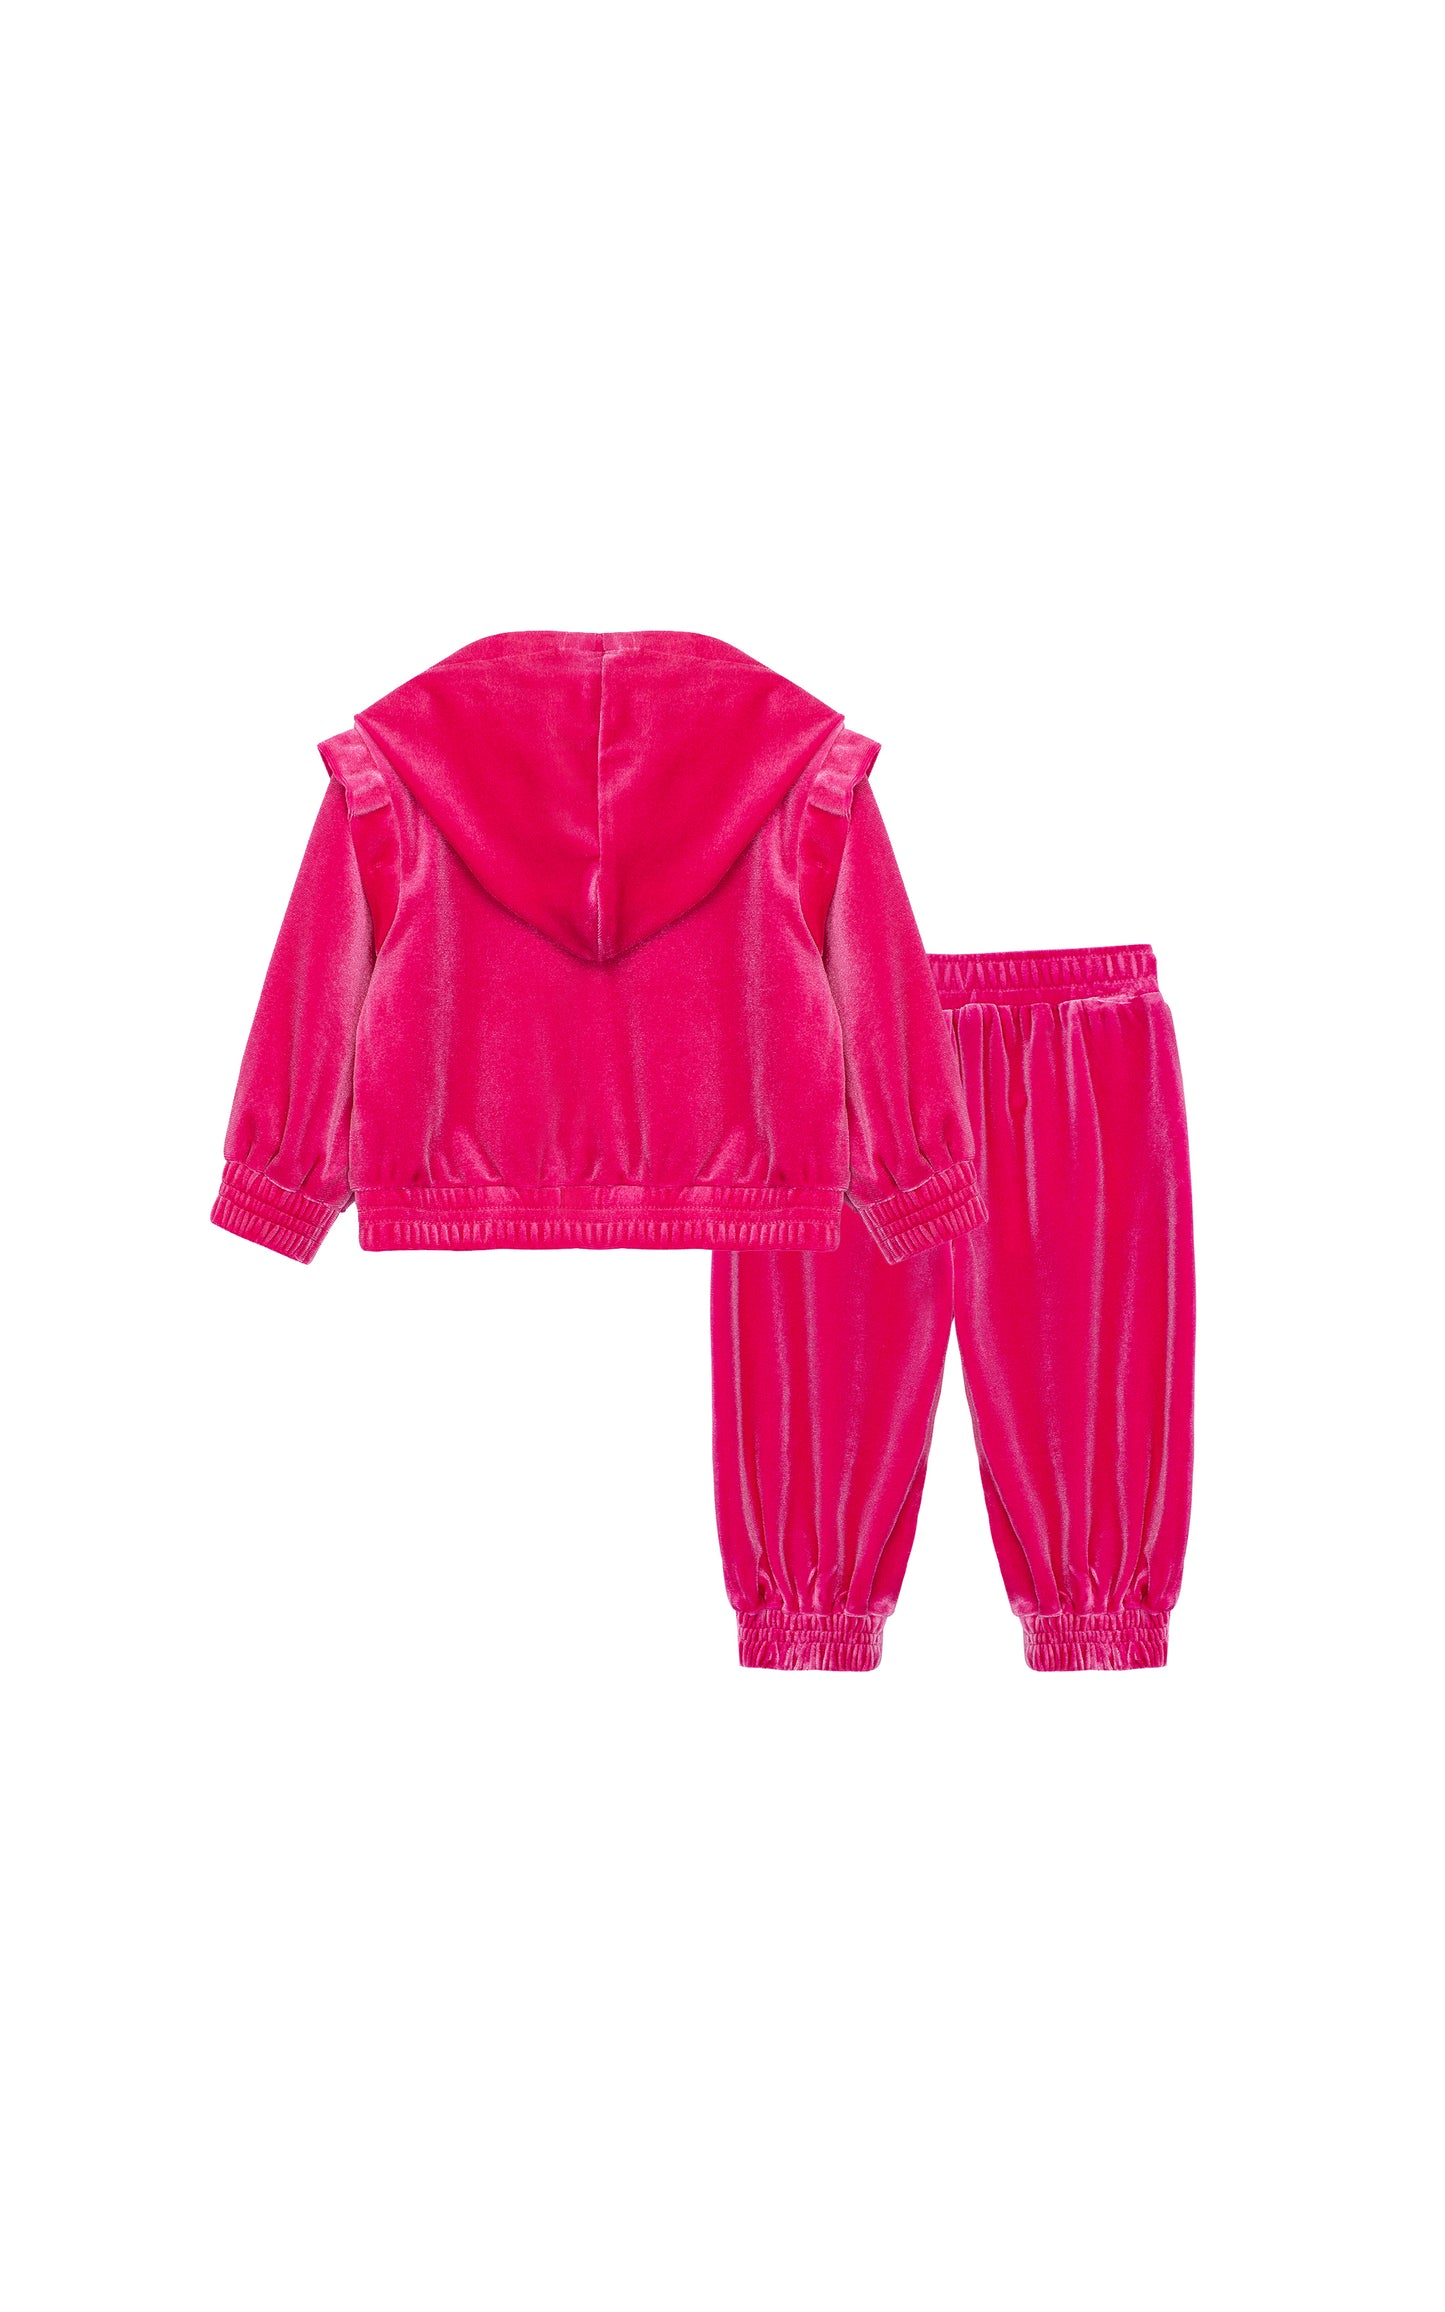 Back view of a hot pink velour tracksuit set